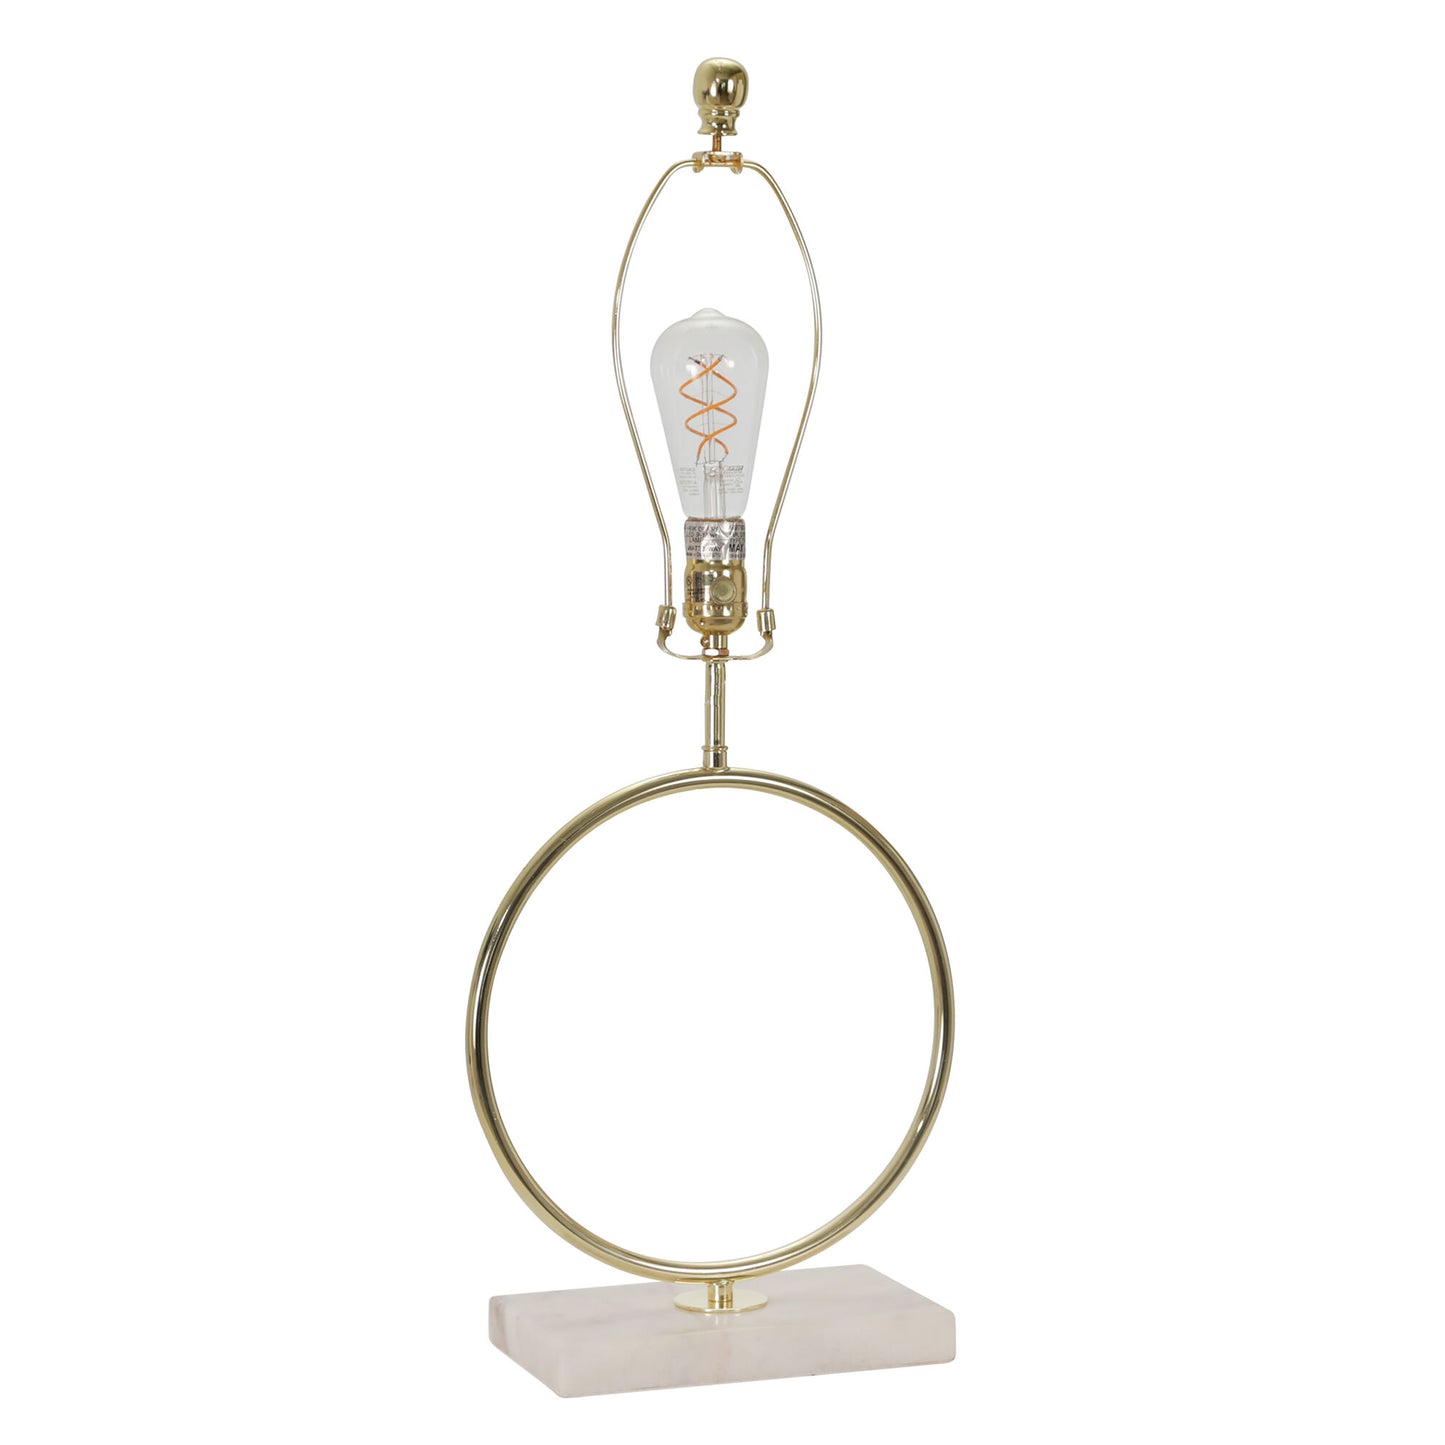 15 Inch Metal Ring Table Lamp with Marble Base - Gold